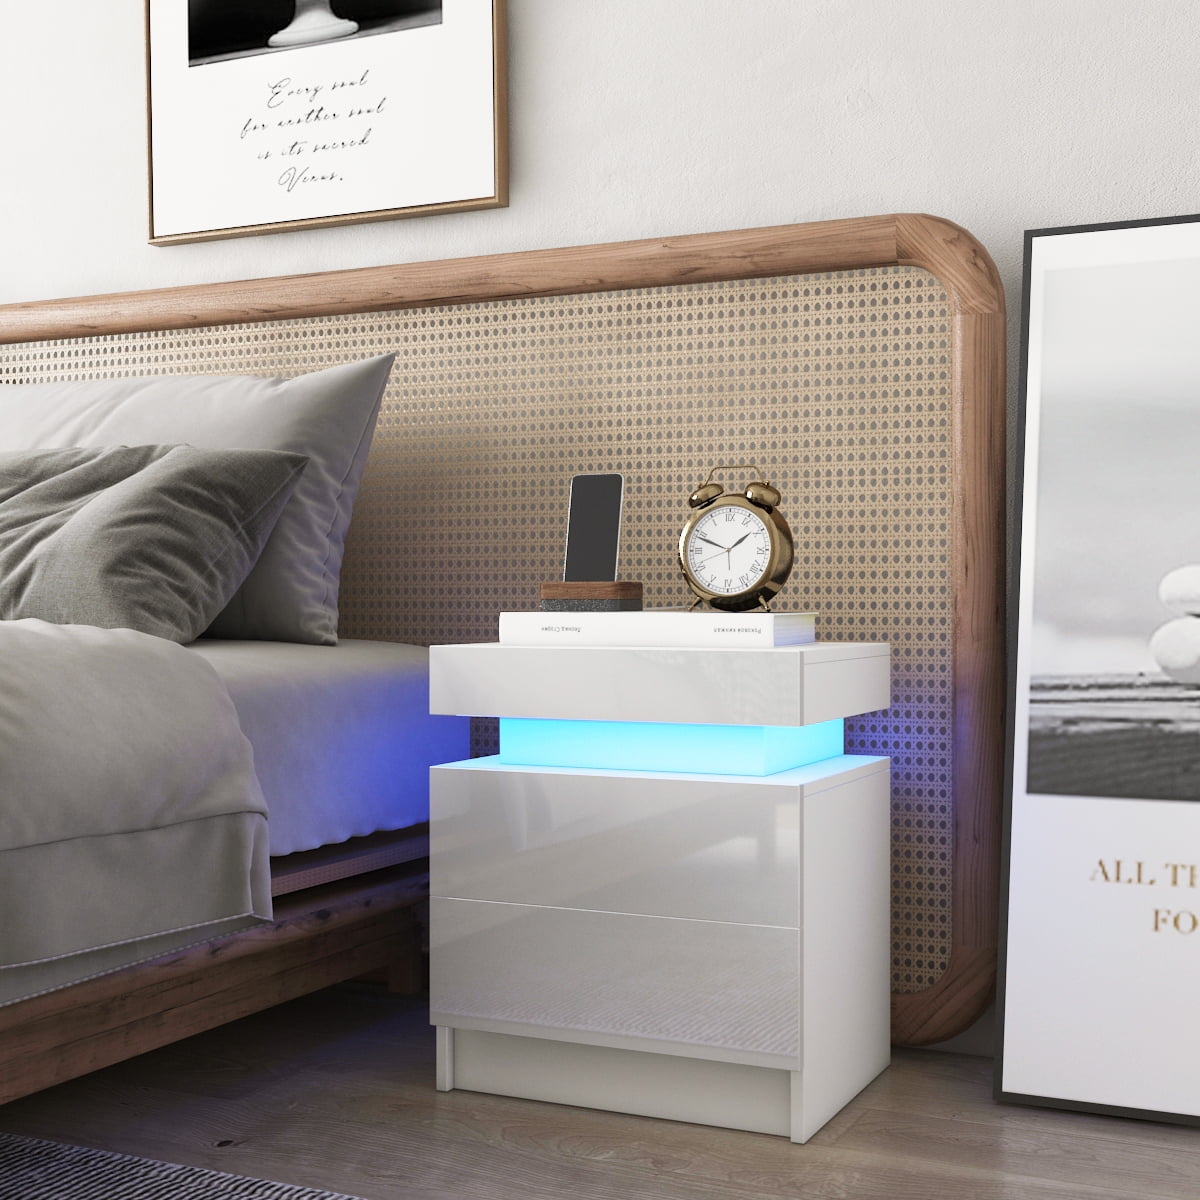 Details about   LaBella Bedside Tables 2/3 Drawers RGB LED Bedroom Cabinet Nightstand Gloss 